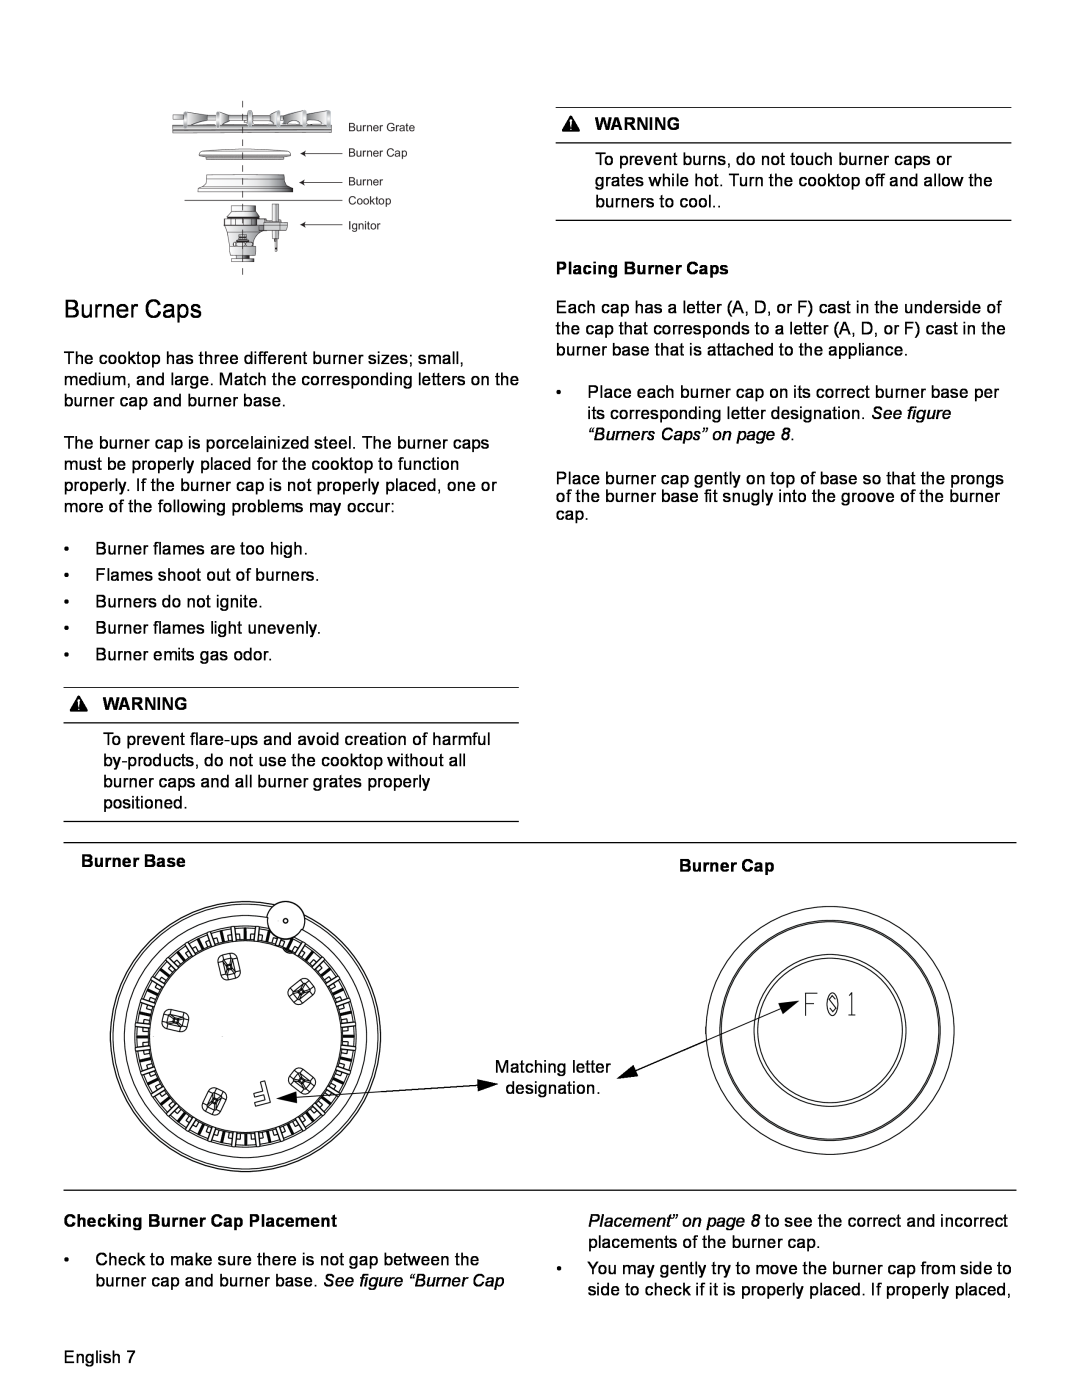 Bosch Appliances HDI8054U Placing Burner Caps, Burner Base, Placement” on page 8 to see the correct and incorrect 